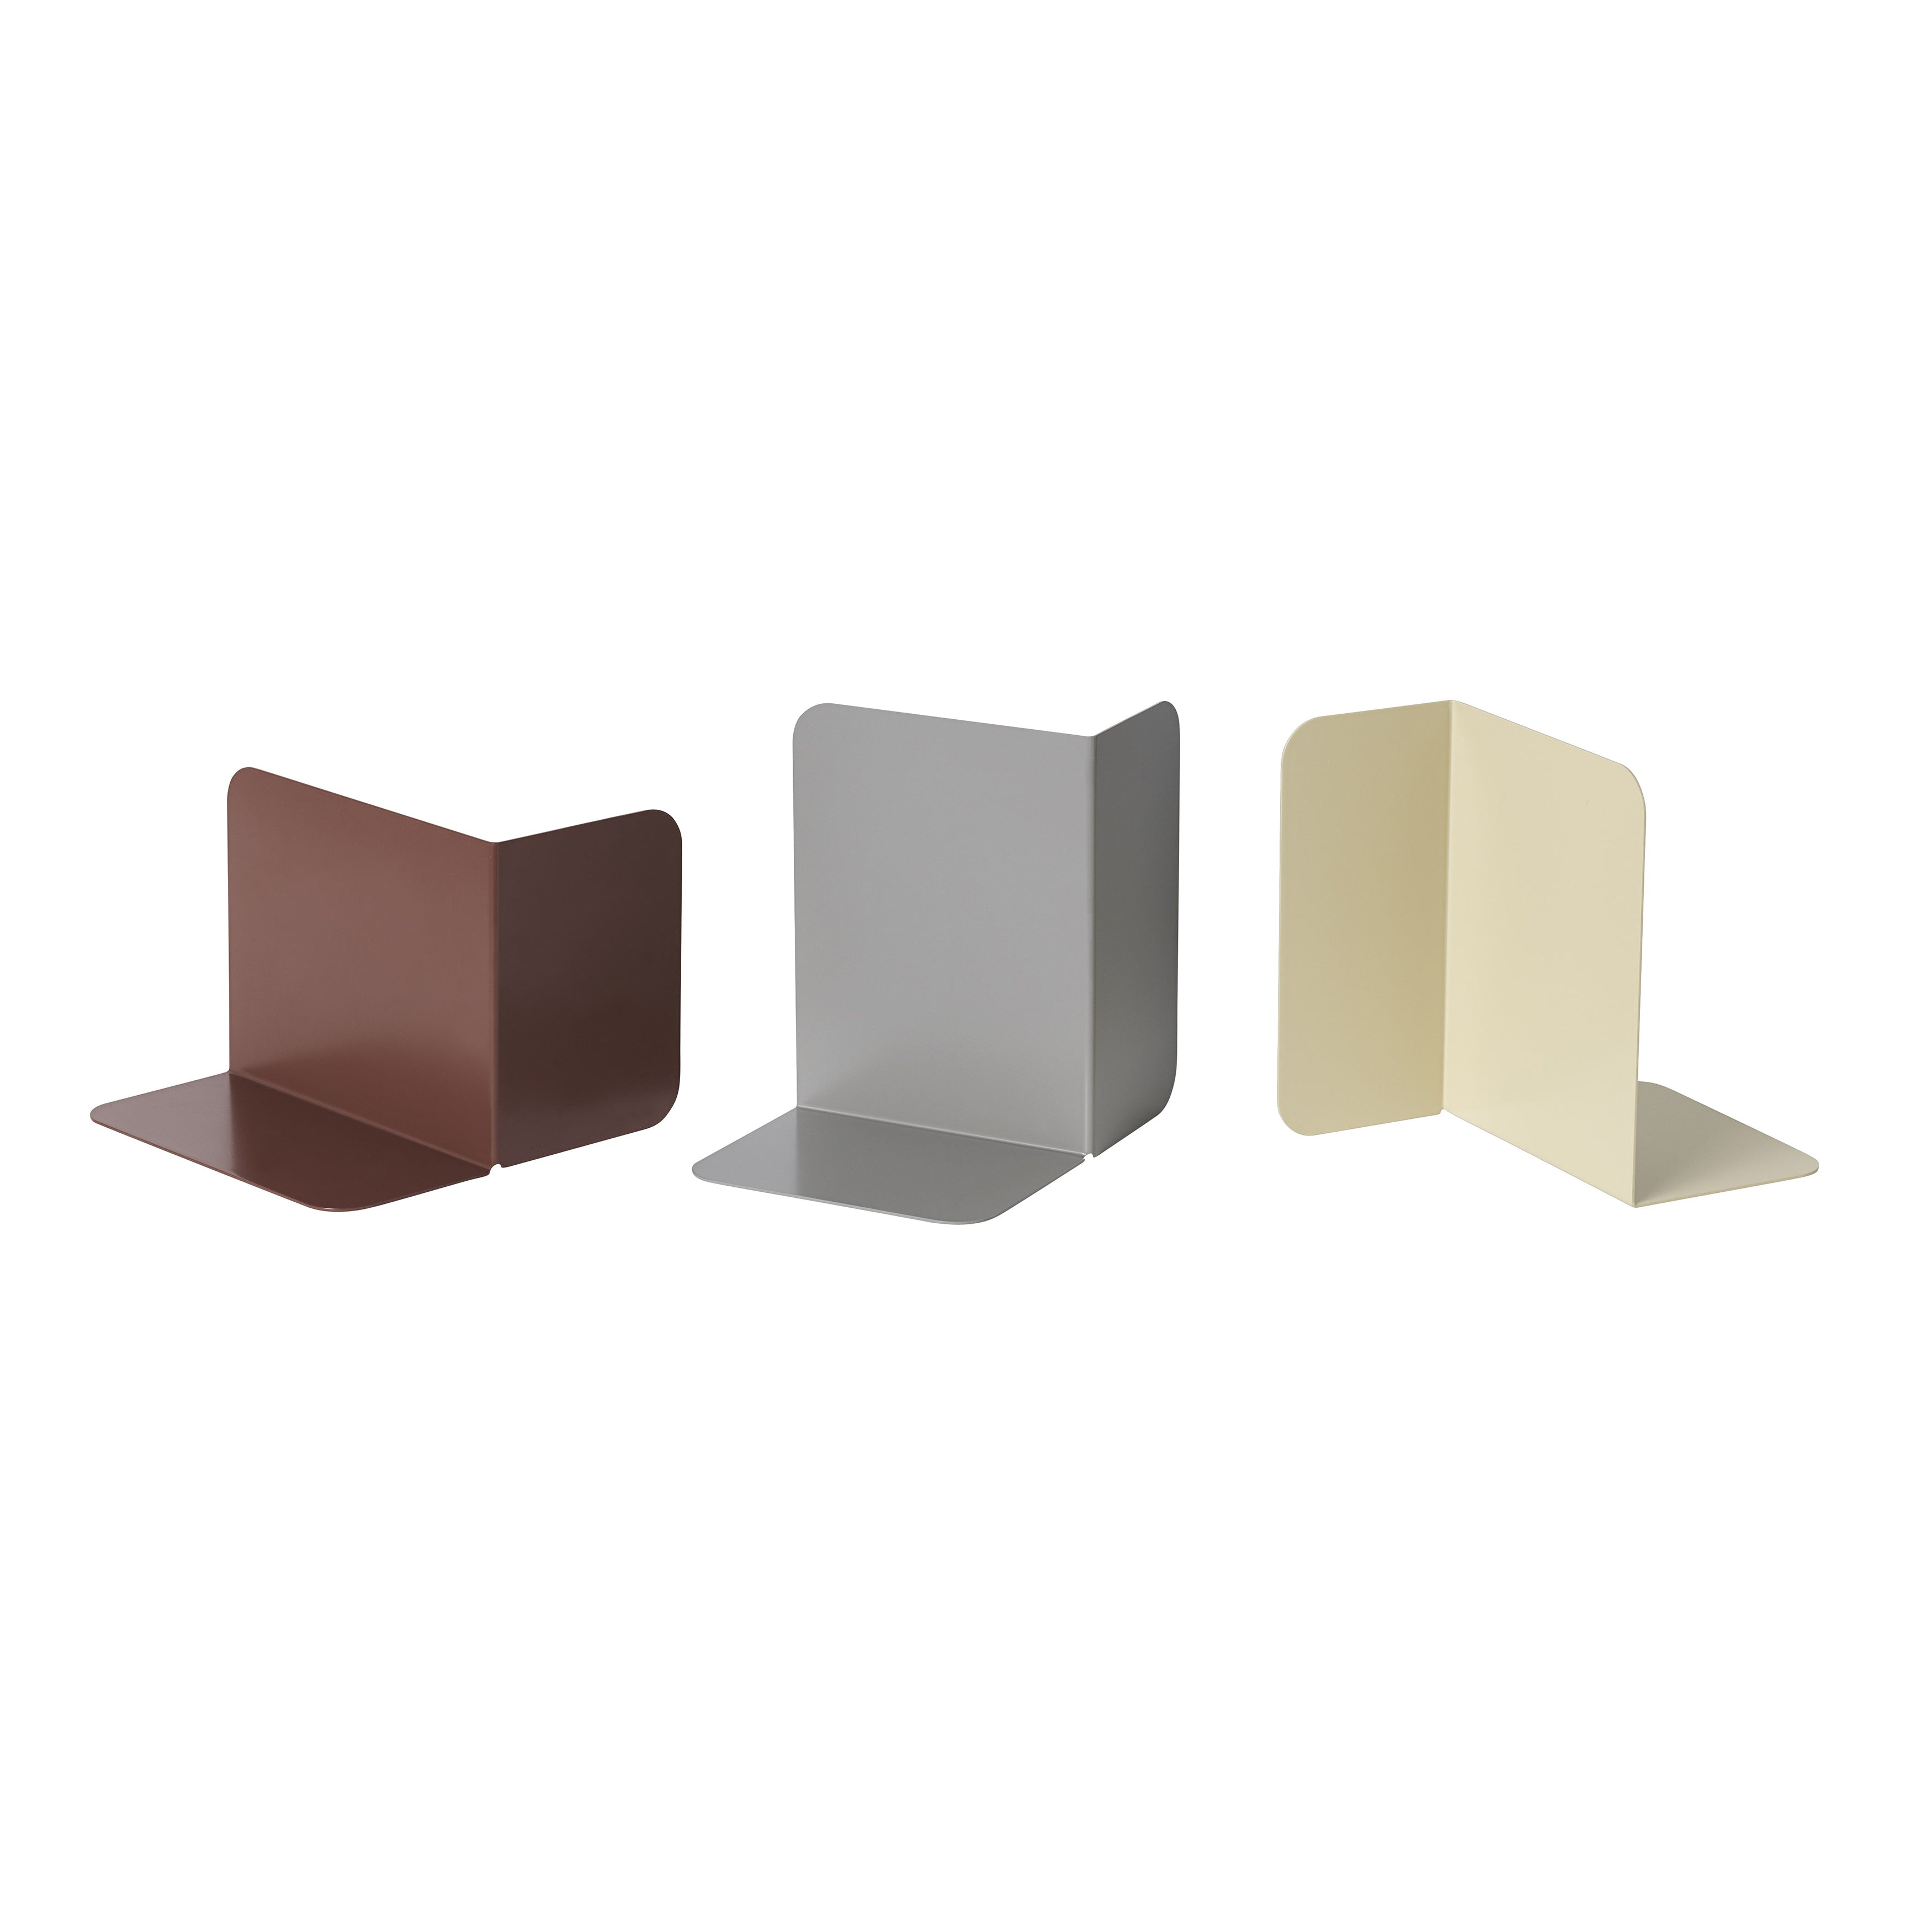 Compile Bookend: Plum + Beige-Green + Grey